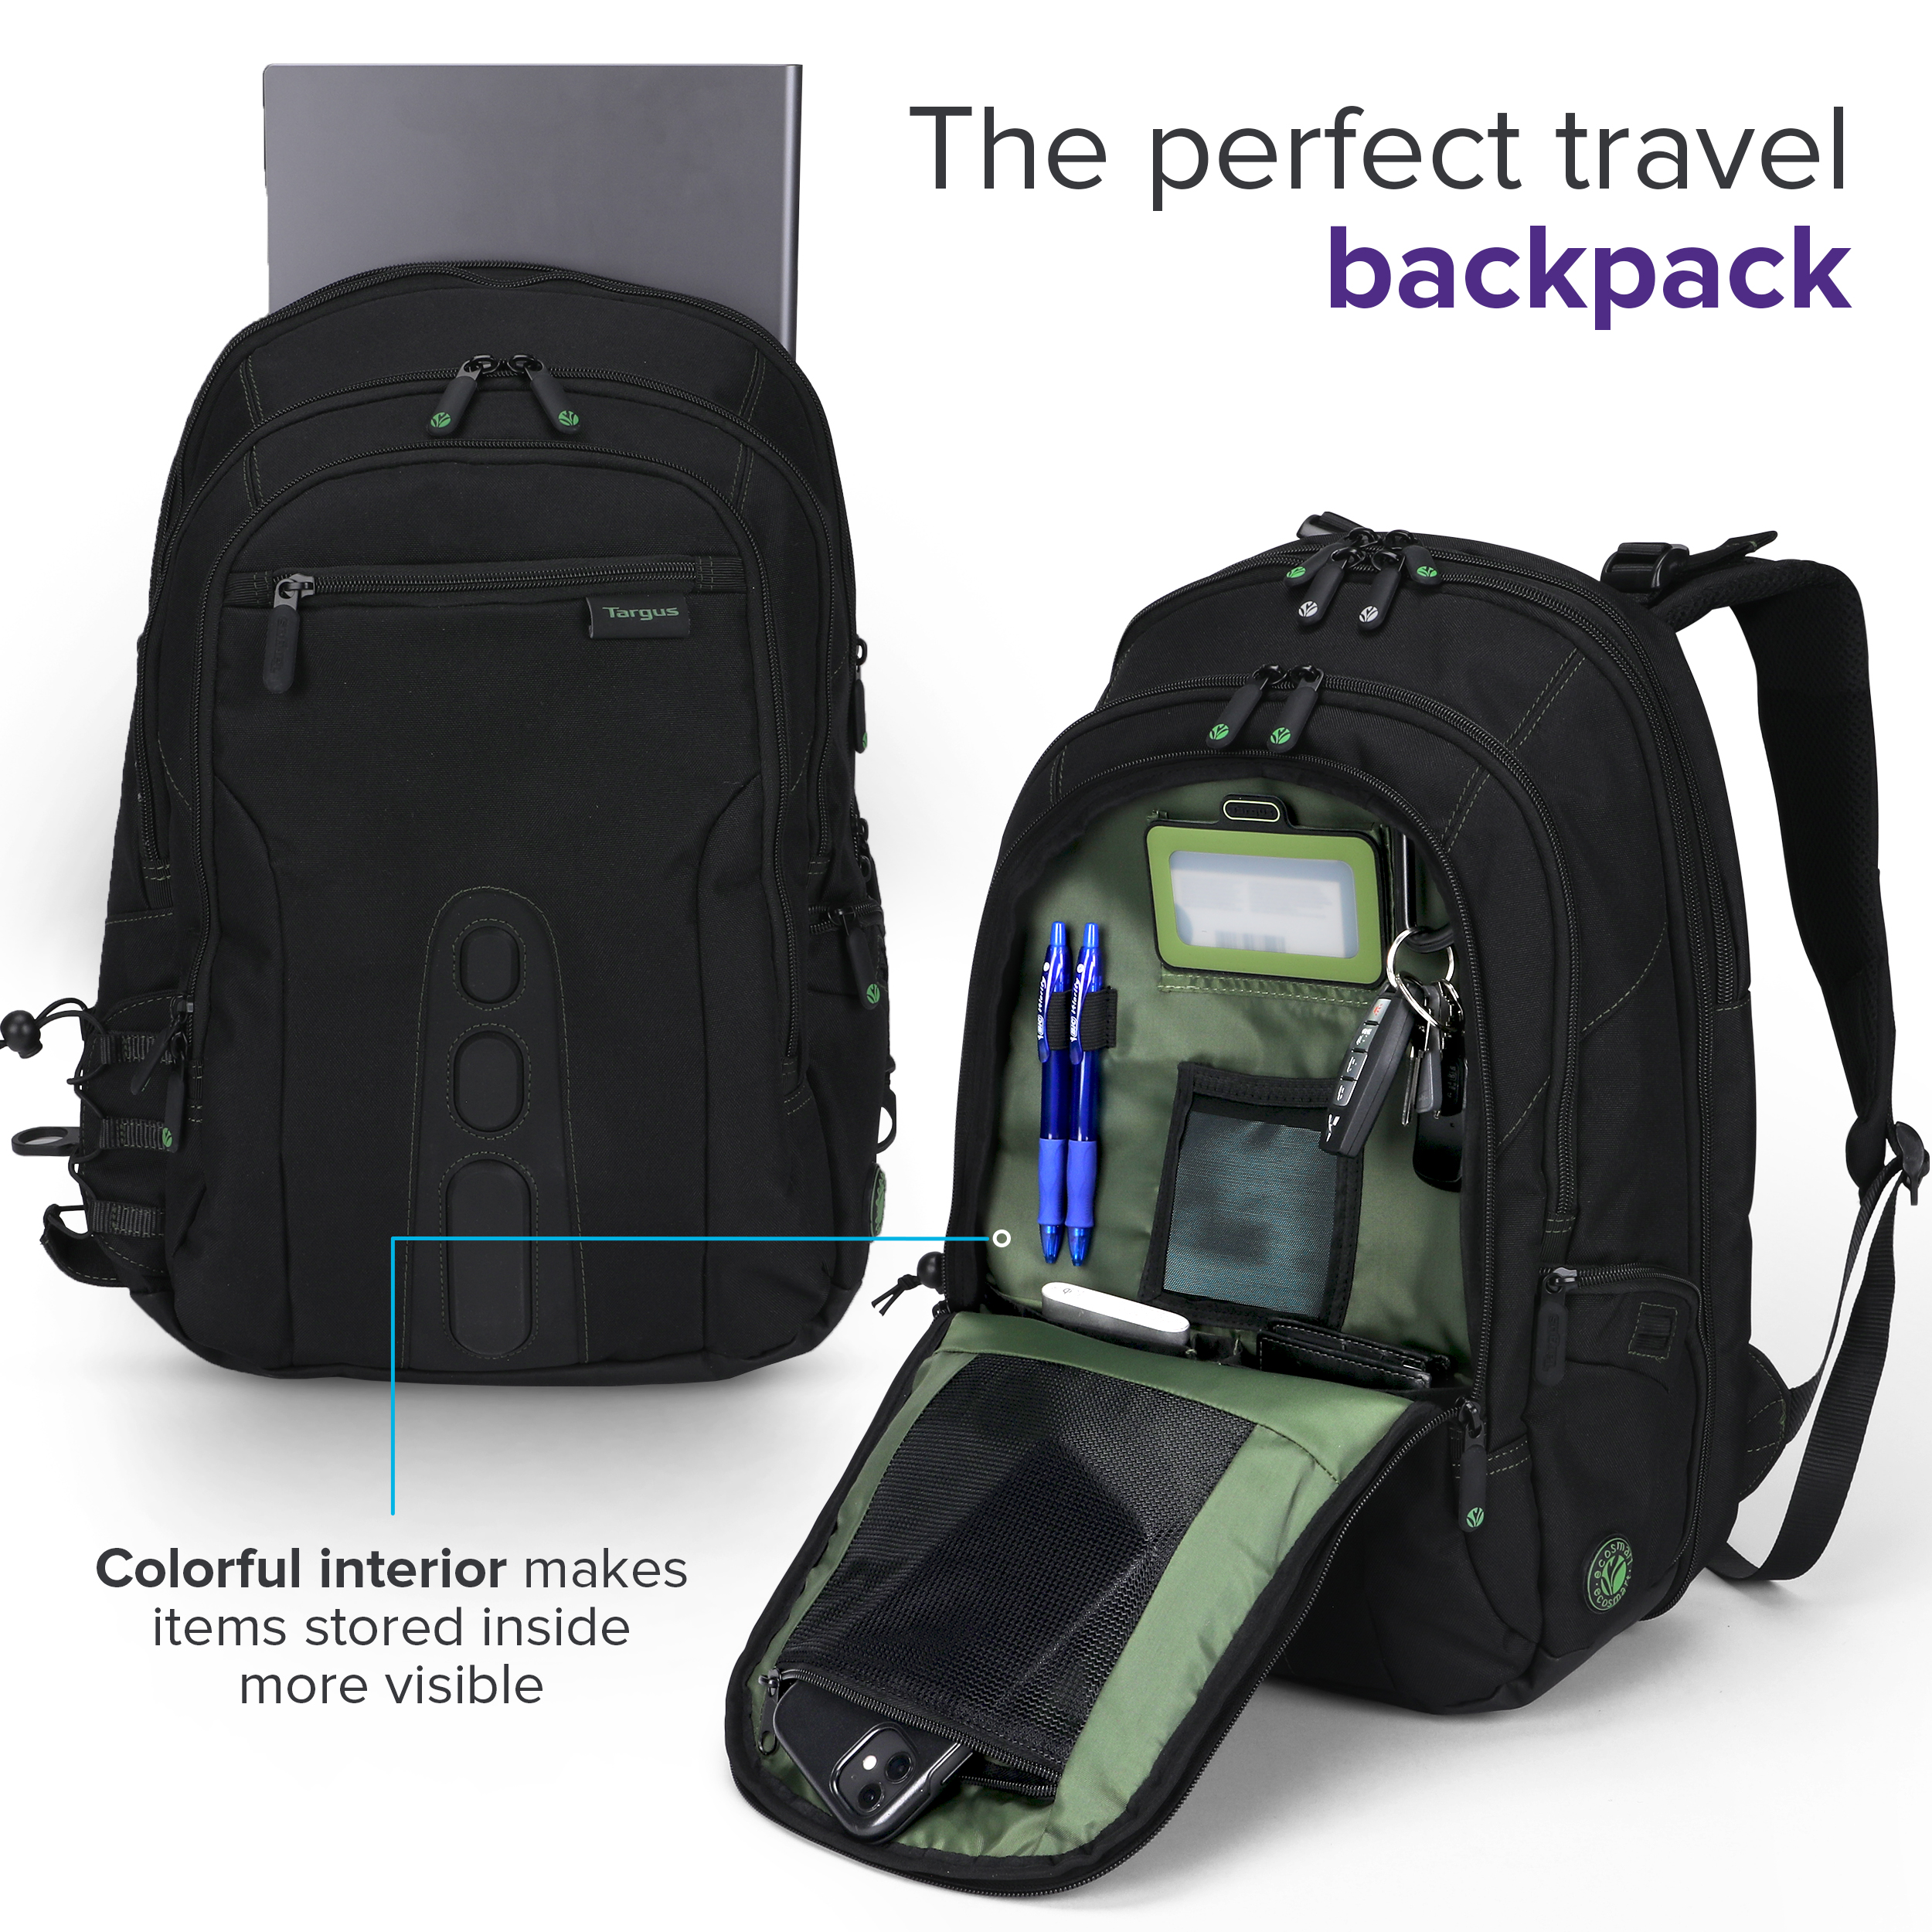 Targus EcoSmart TBB019US Carrying Case (Backpack) for 17" Notebook - Black, Green - image 3 of 9